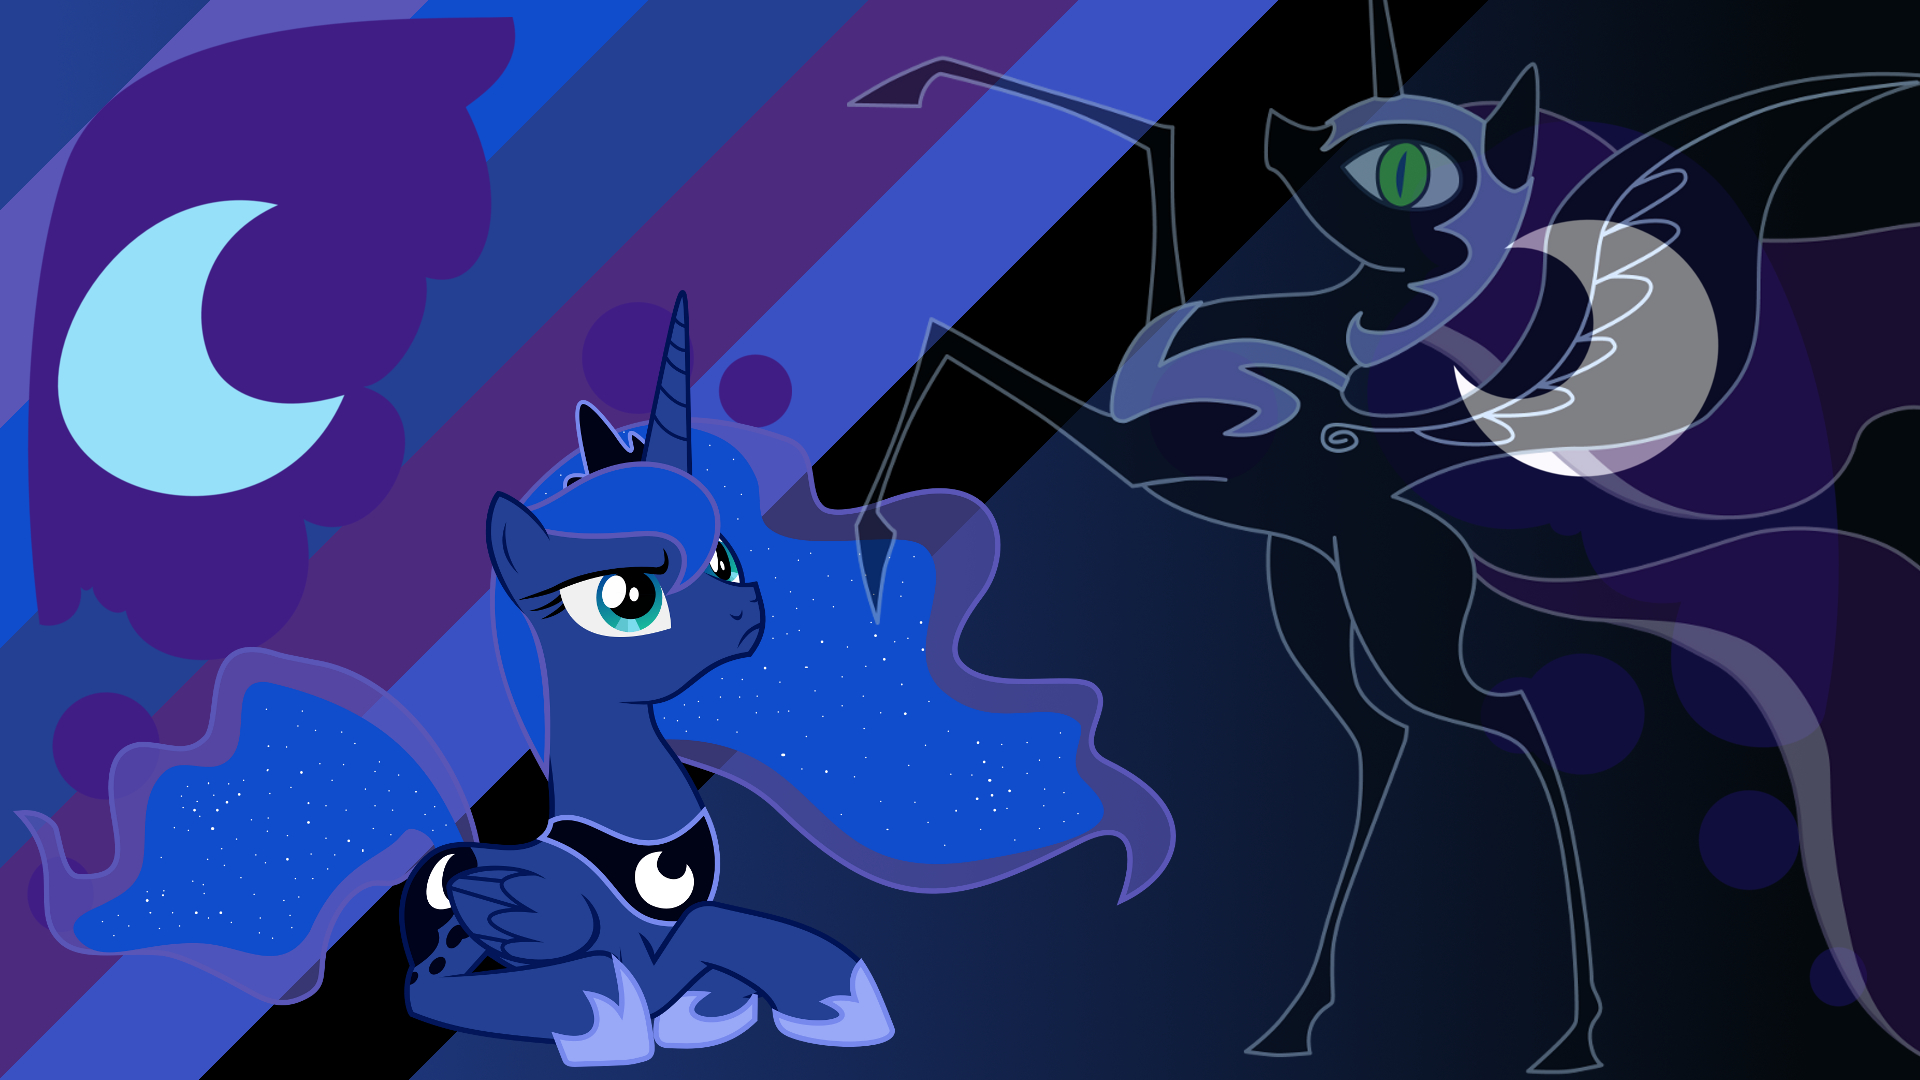 Minimalist Wallpaper 33: Luna and Nightmare Moon by bassofthe, Fennrick, Softfang and The-Smiling-Pony